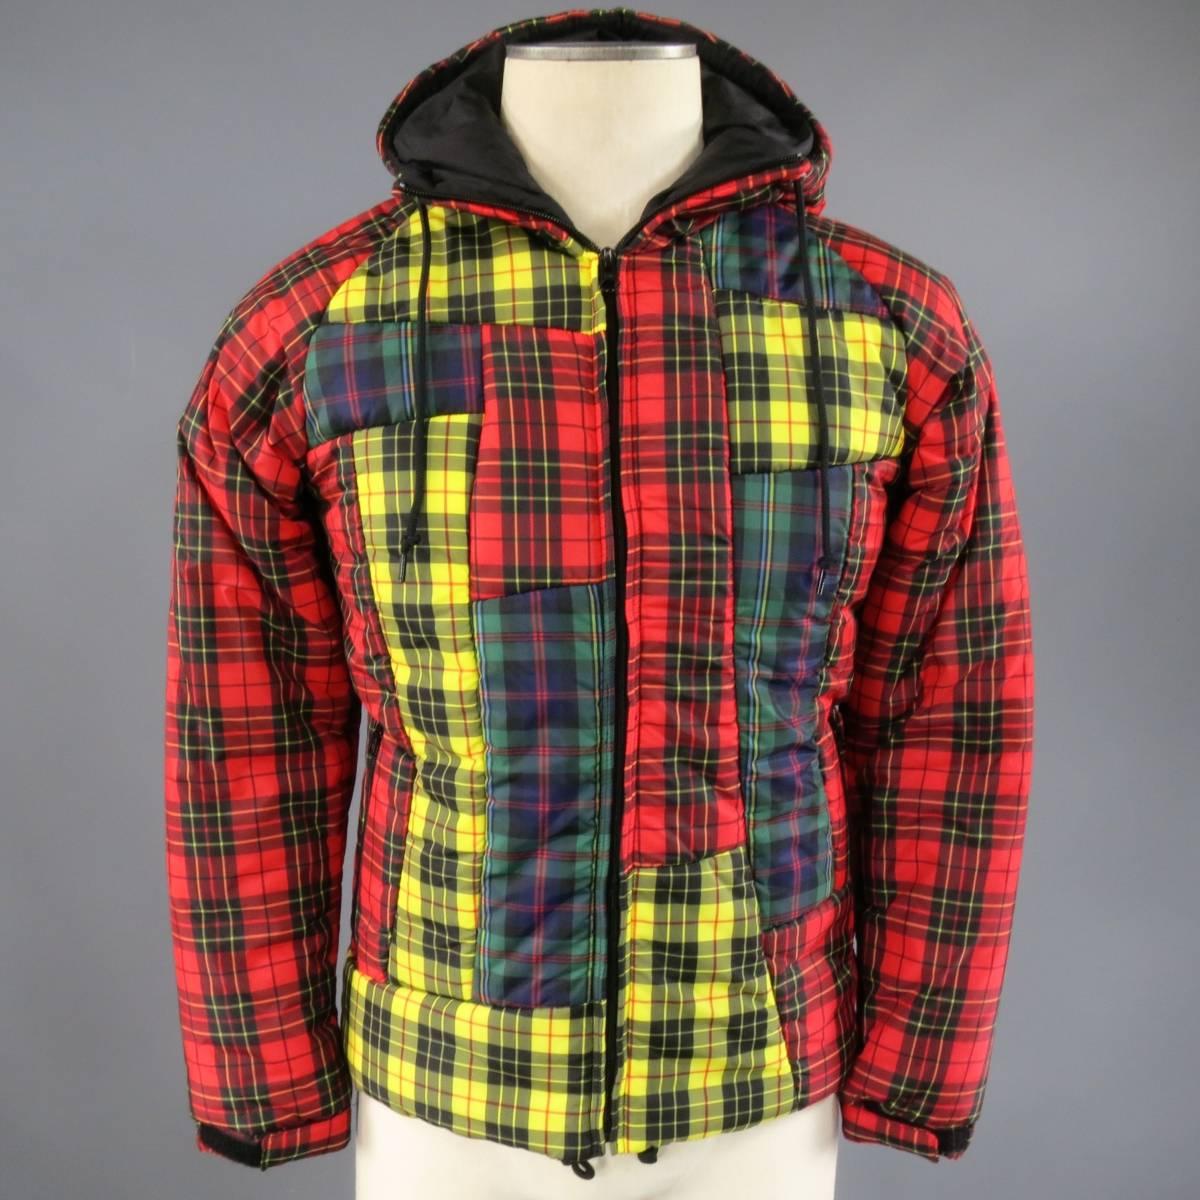 This rare COMME DES GARCONS winter puff jacket comes in red, green, & yellow tartan plaid nylon and features a drawstring hood, black zip front, double zip pockets, red raglan sleeves, velcro cuffs, and avant garde color block patchwork front.
